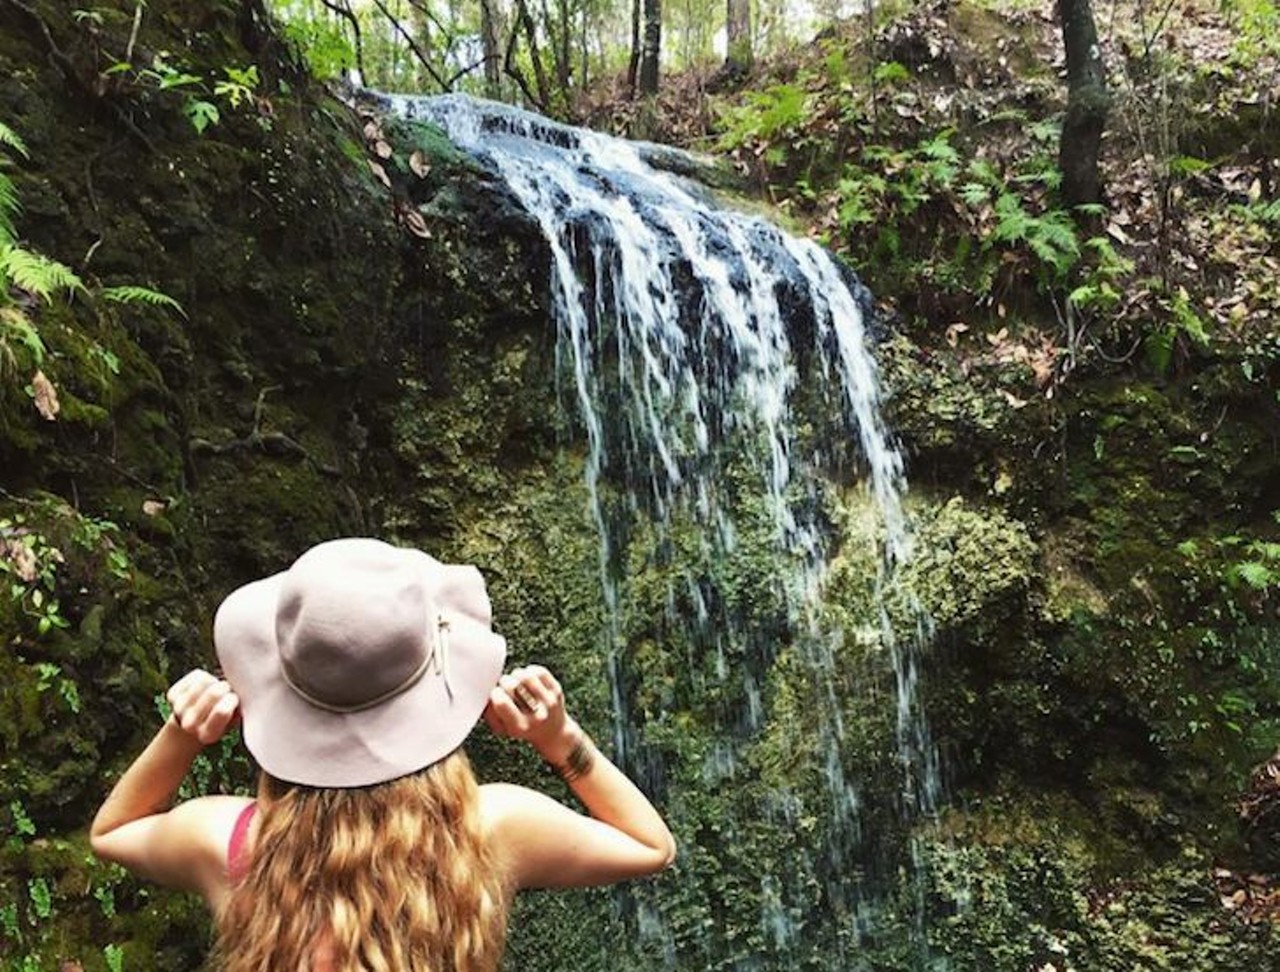 Falling Waters State Park
State Park Road, Chipley, (850) 638-6130
In a place as flat as Florida, waterfalls are pretty rare, so it isn&#146;t every day you&#146;ll get to see wonders like this 73-foot beauty cascade into a sinkhole.
Photo via tessa_lations/Instagram